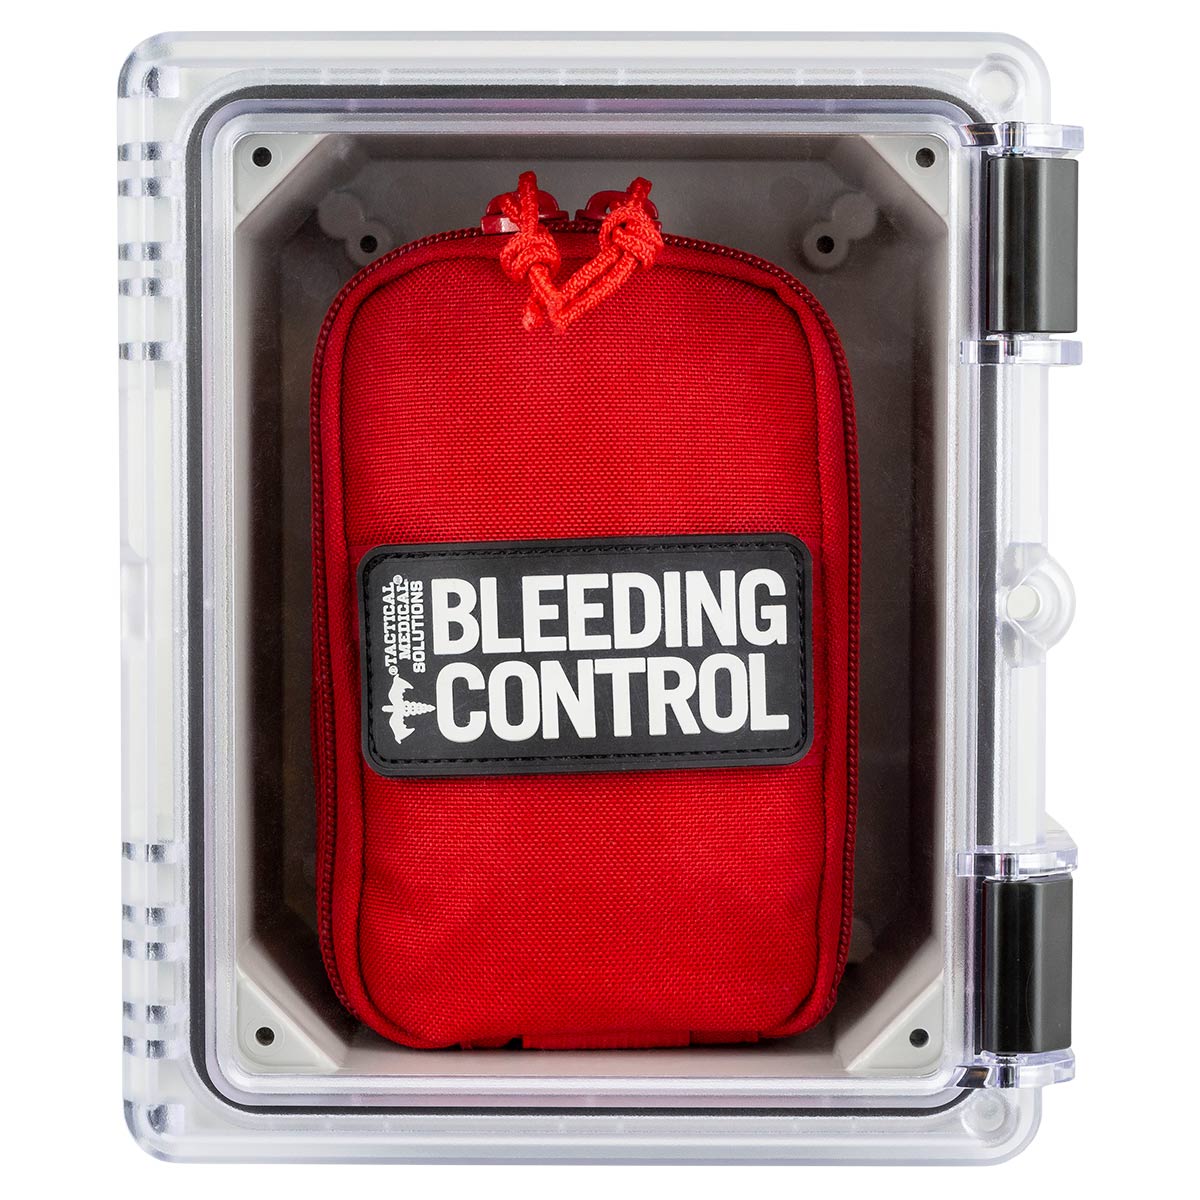 Cabinet for Bleeding Control Kits